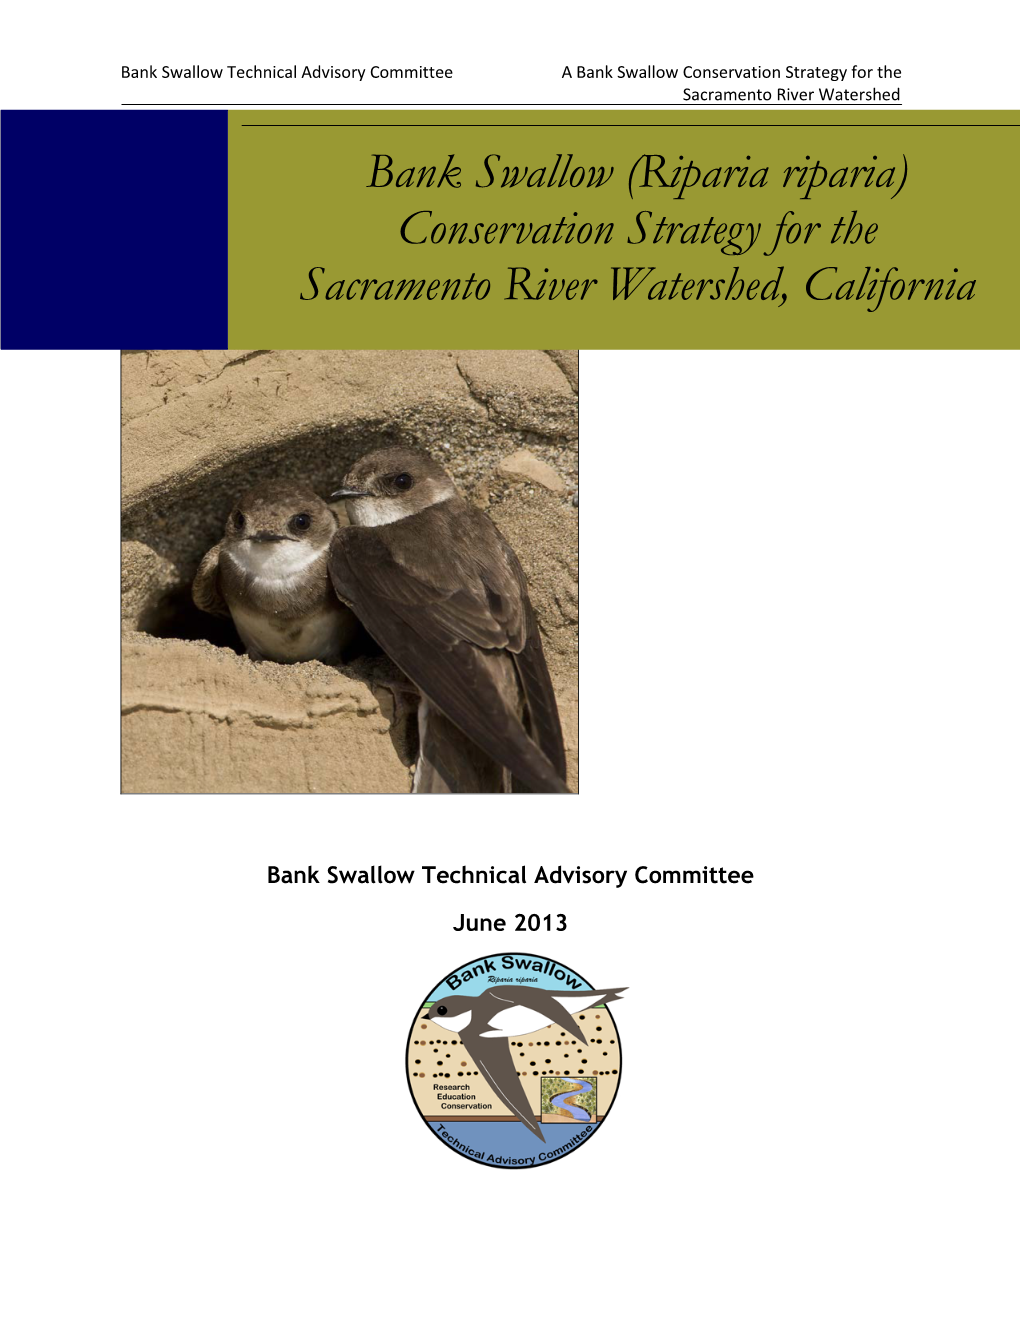 Bank Swallow Technical Advisory Committee a Bank Swallow Conservation Strategy for the Sacramento River Watershed